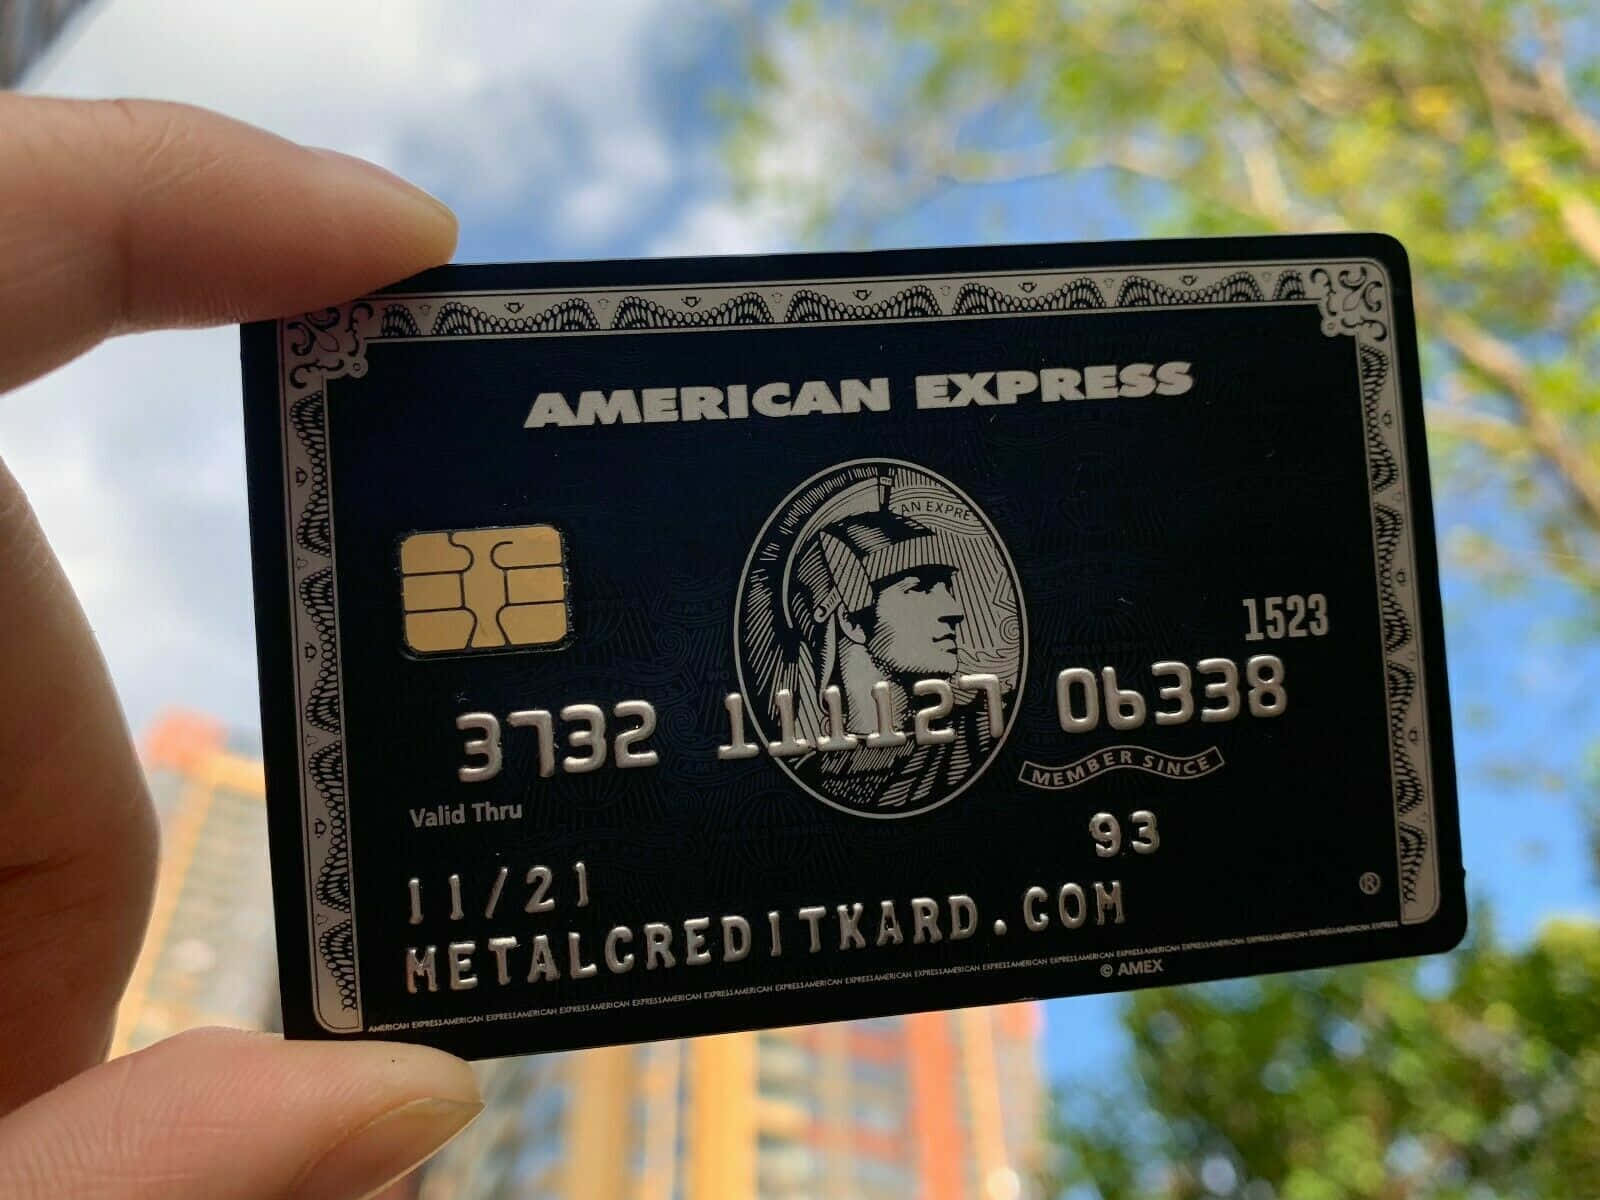 Get the most out of life with American Express